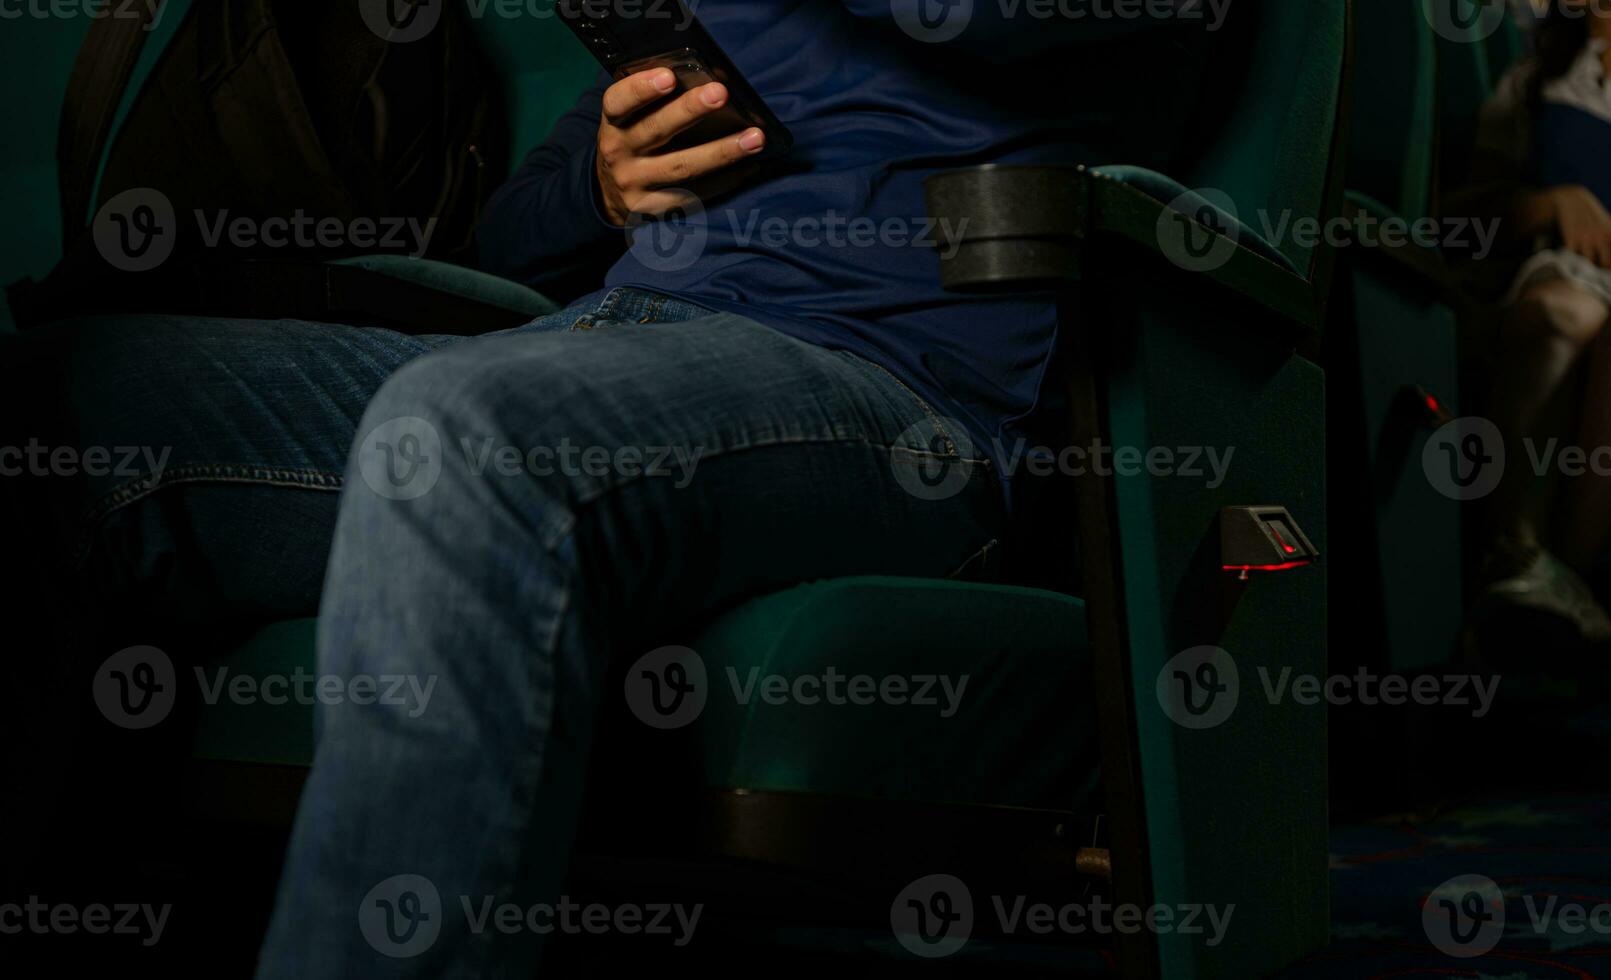 Young man sitting in a chair and using his mobile phone in the cinema photo